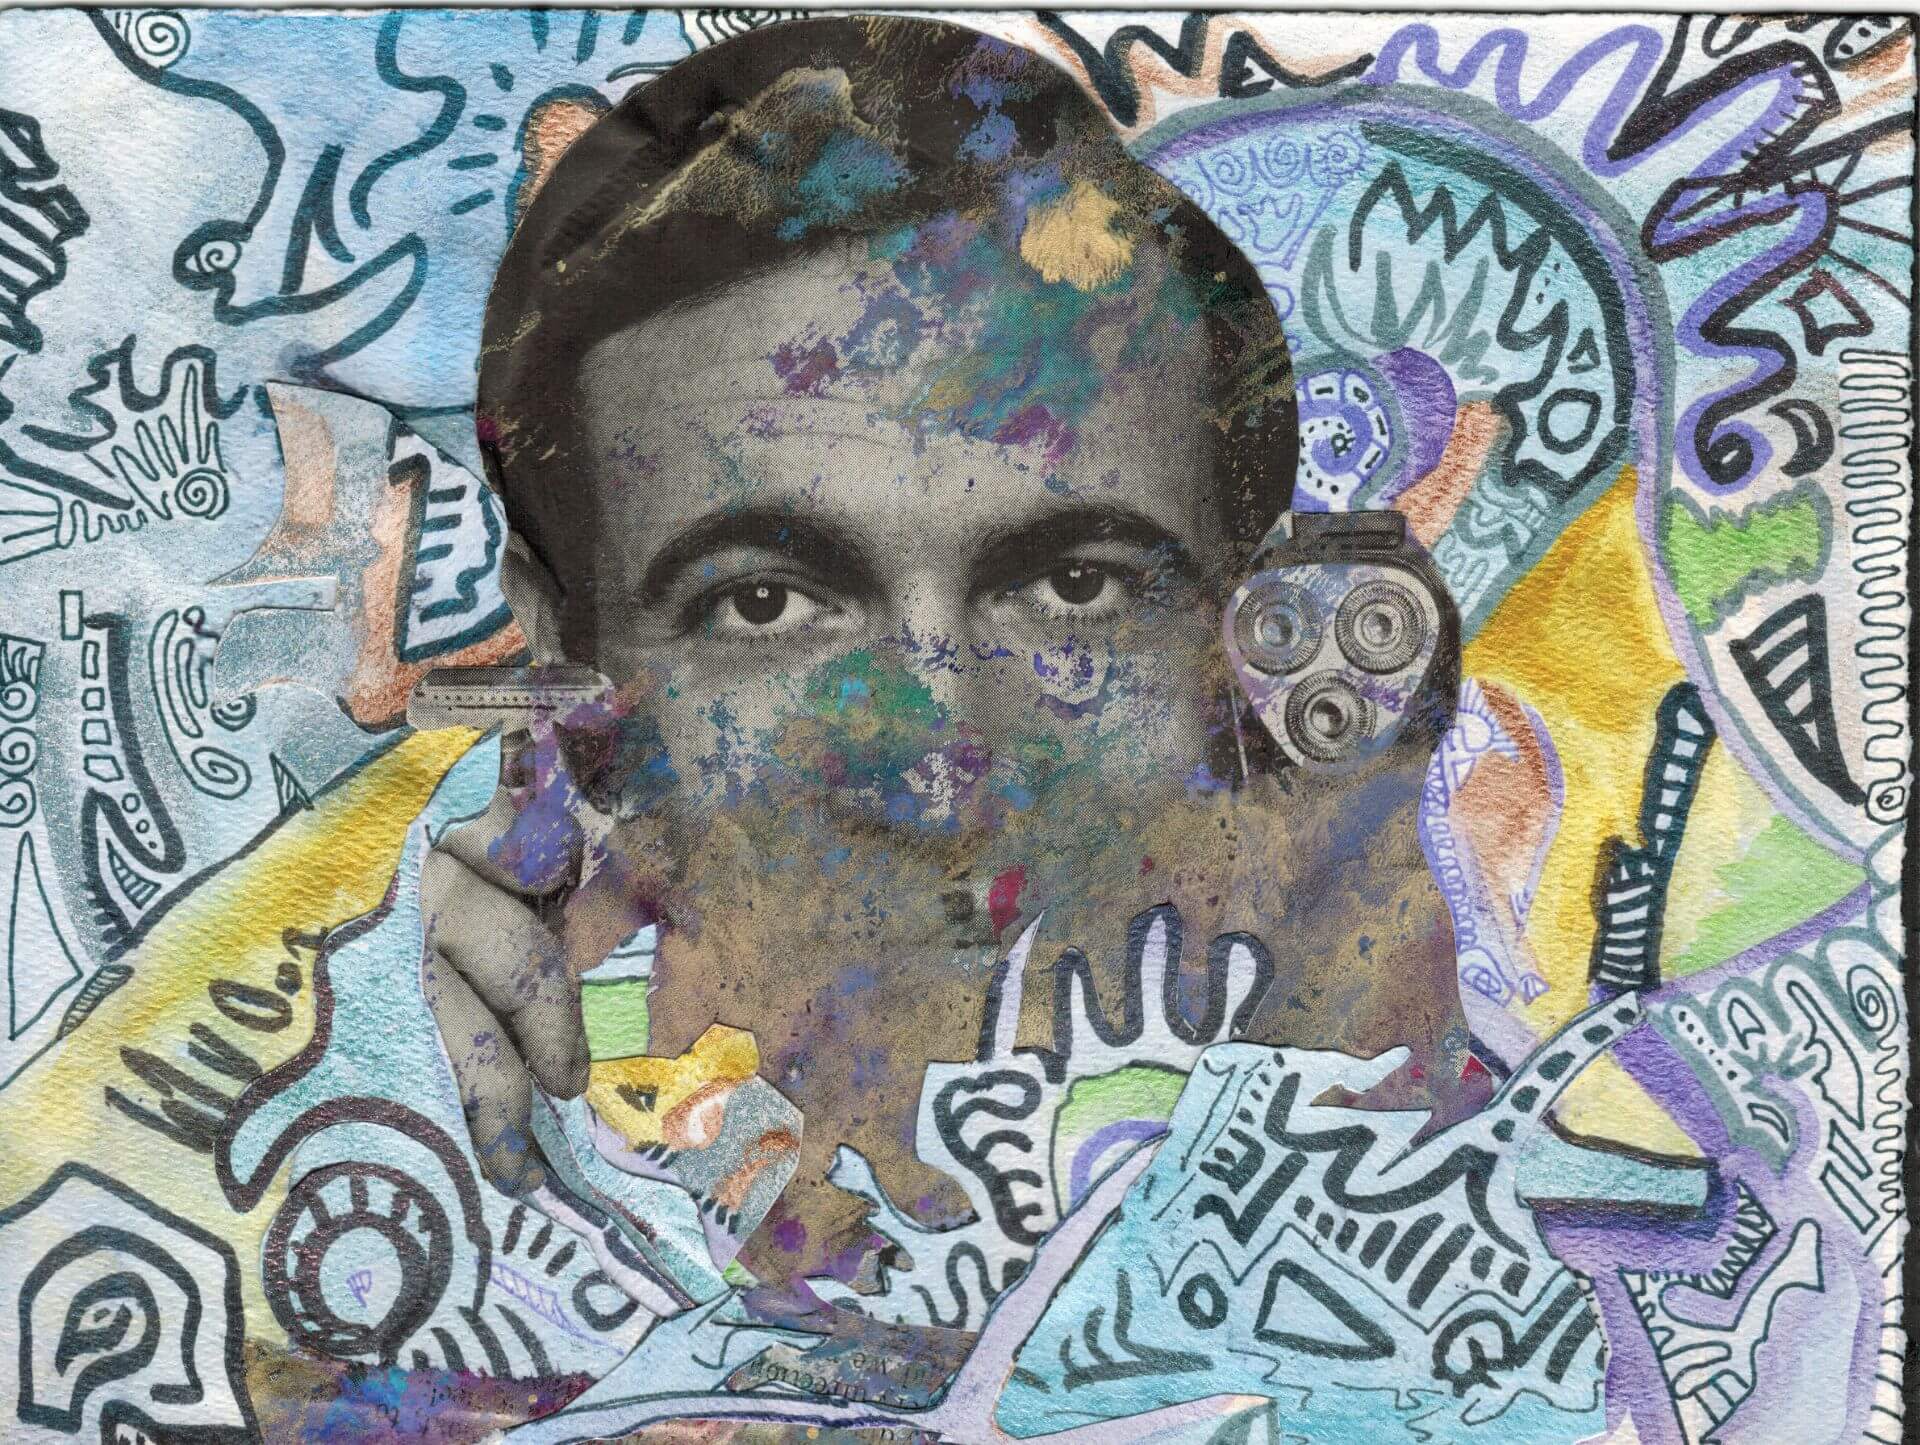 A funky example of Jamie's mixed media art. It has a b&w man's face center with blue and purple Keith Haring style doodles around him